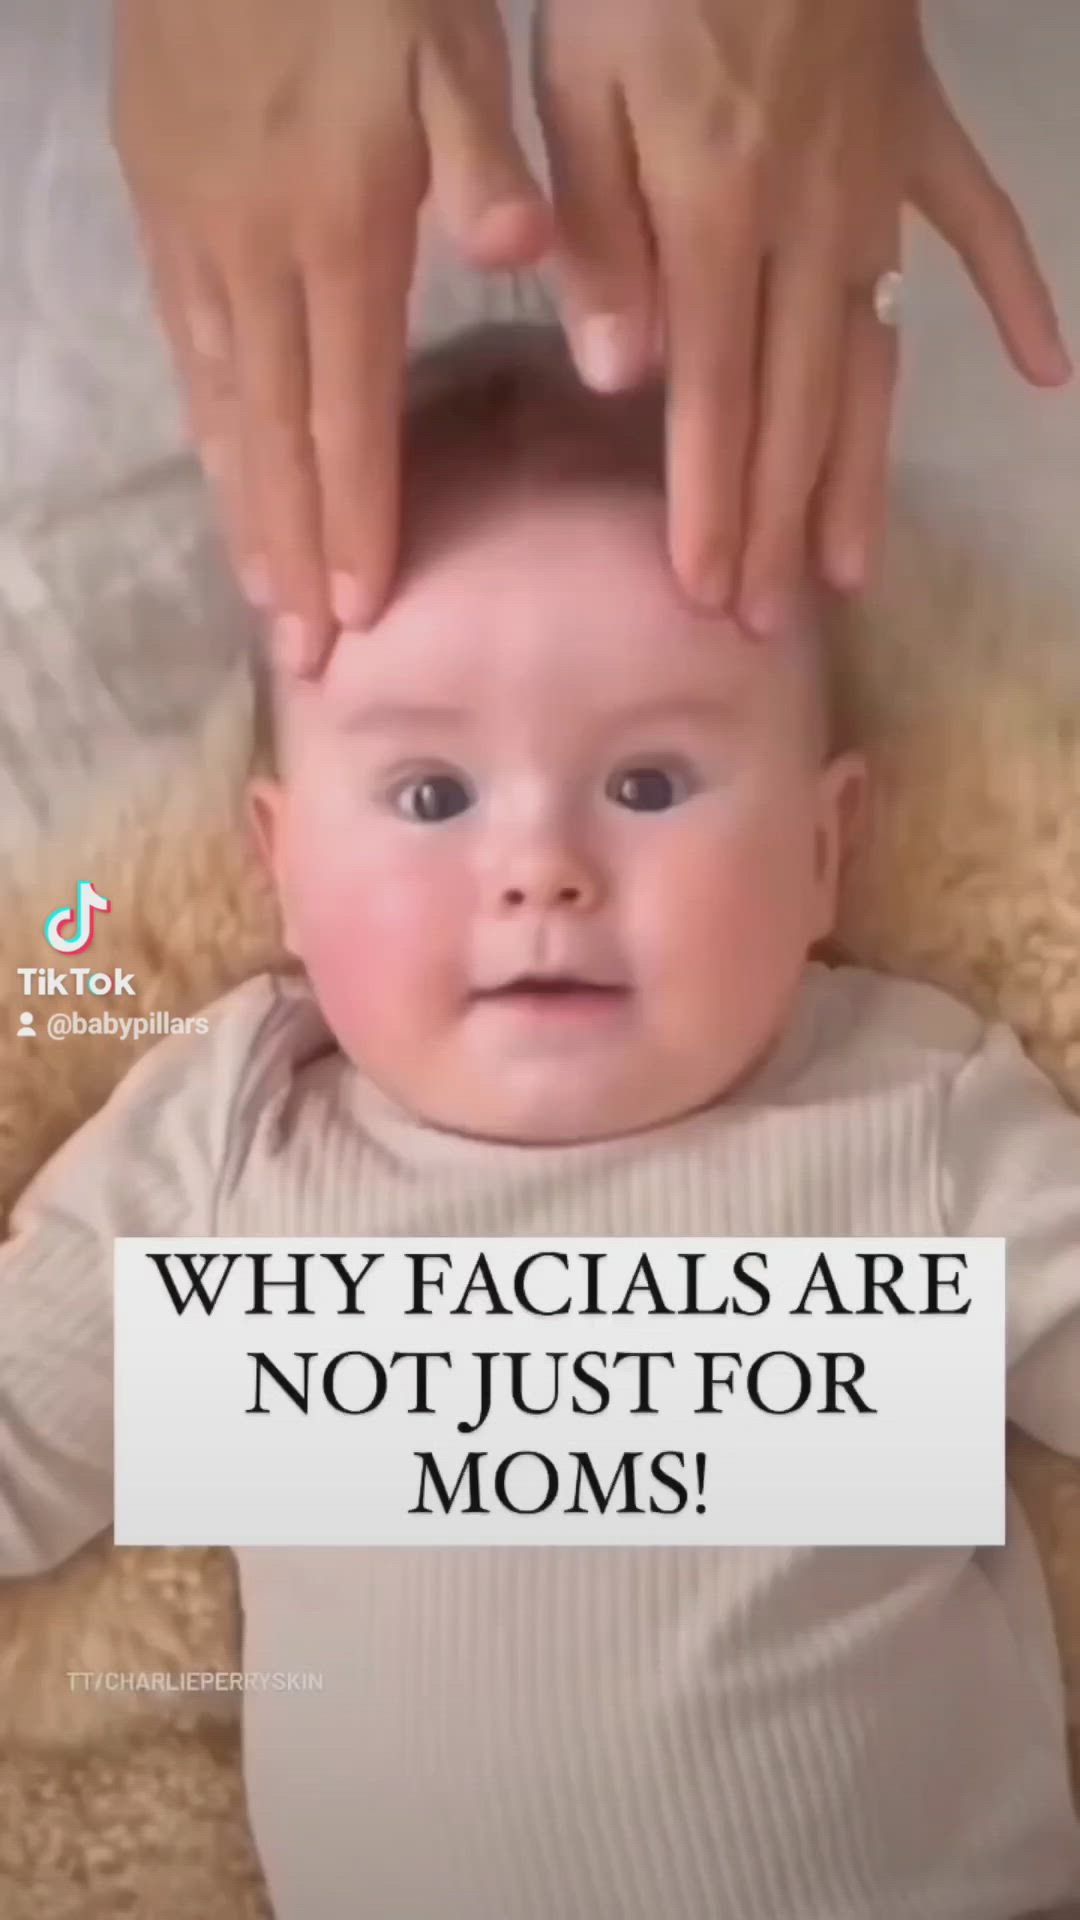 This contains an image of: Why facials are not just for moms